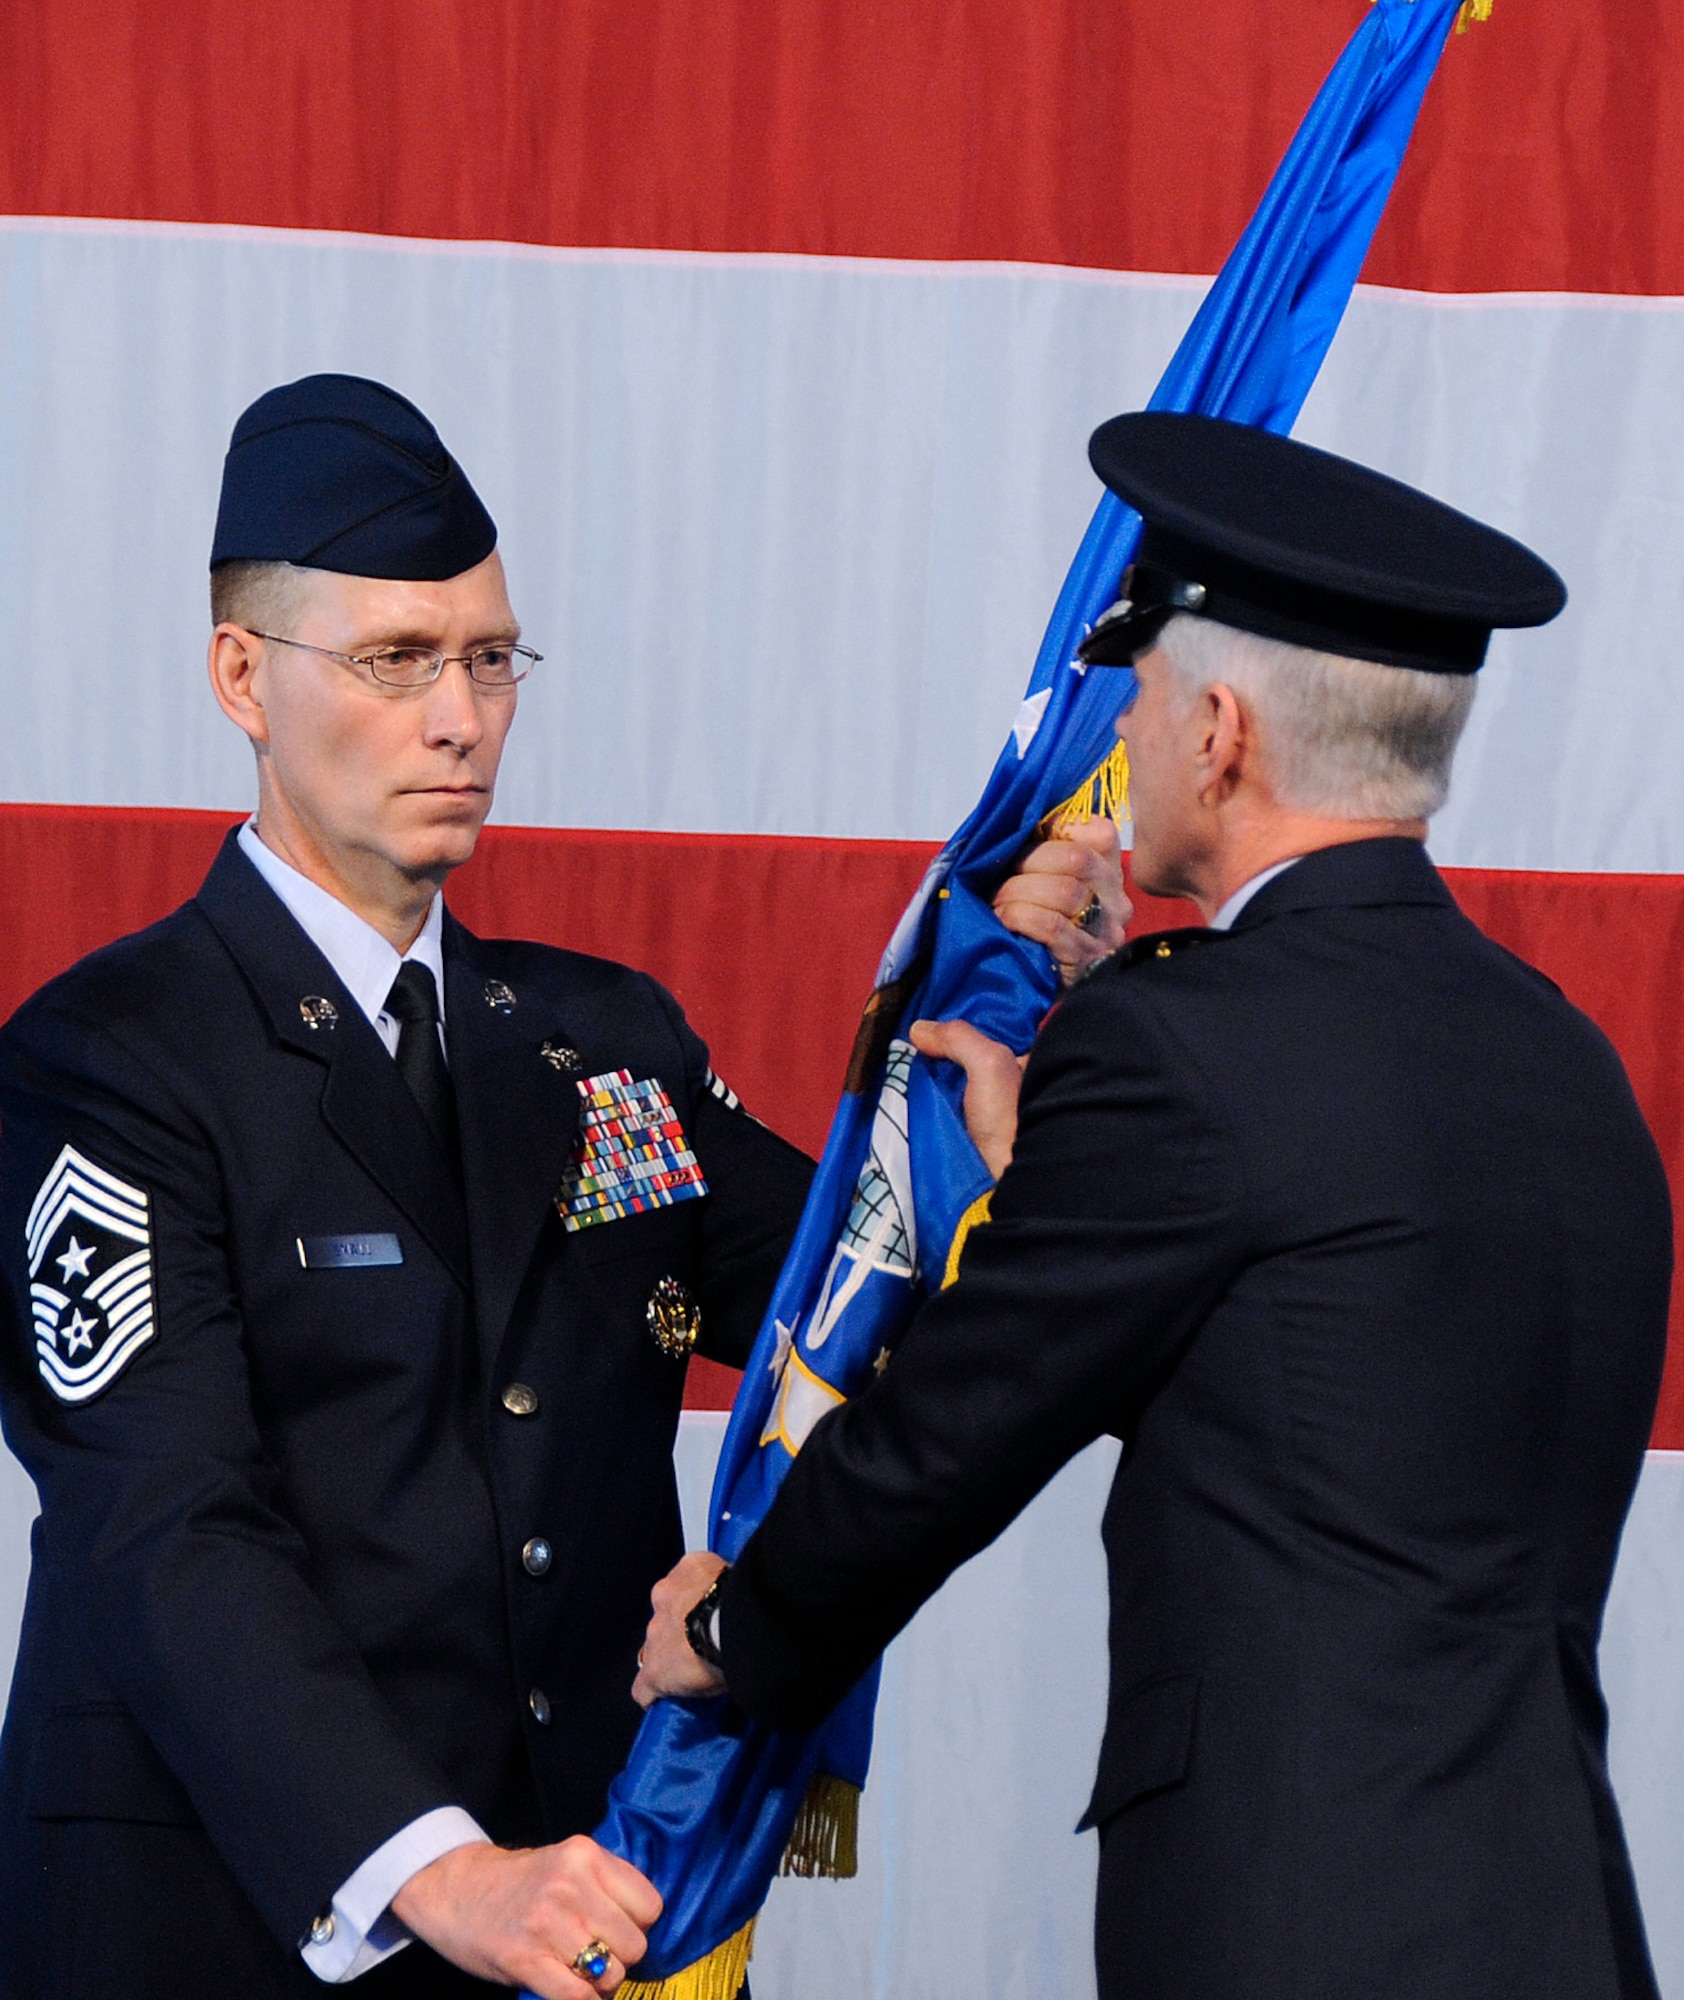 Gen. William L. Shelton receives the Air Force Space Command guidon from Chief Master Sgt. Richard T. Small, becoming the 15th commander of AFSPC during the change of command ceremony Jan. 5, 2011, at Peterson Air Force Base, Colo. Chief Small is the command chief master sergeant of AFSPC. (U.S. Air Force photo/Duncan Wood)